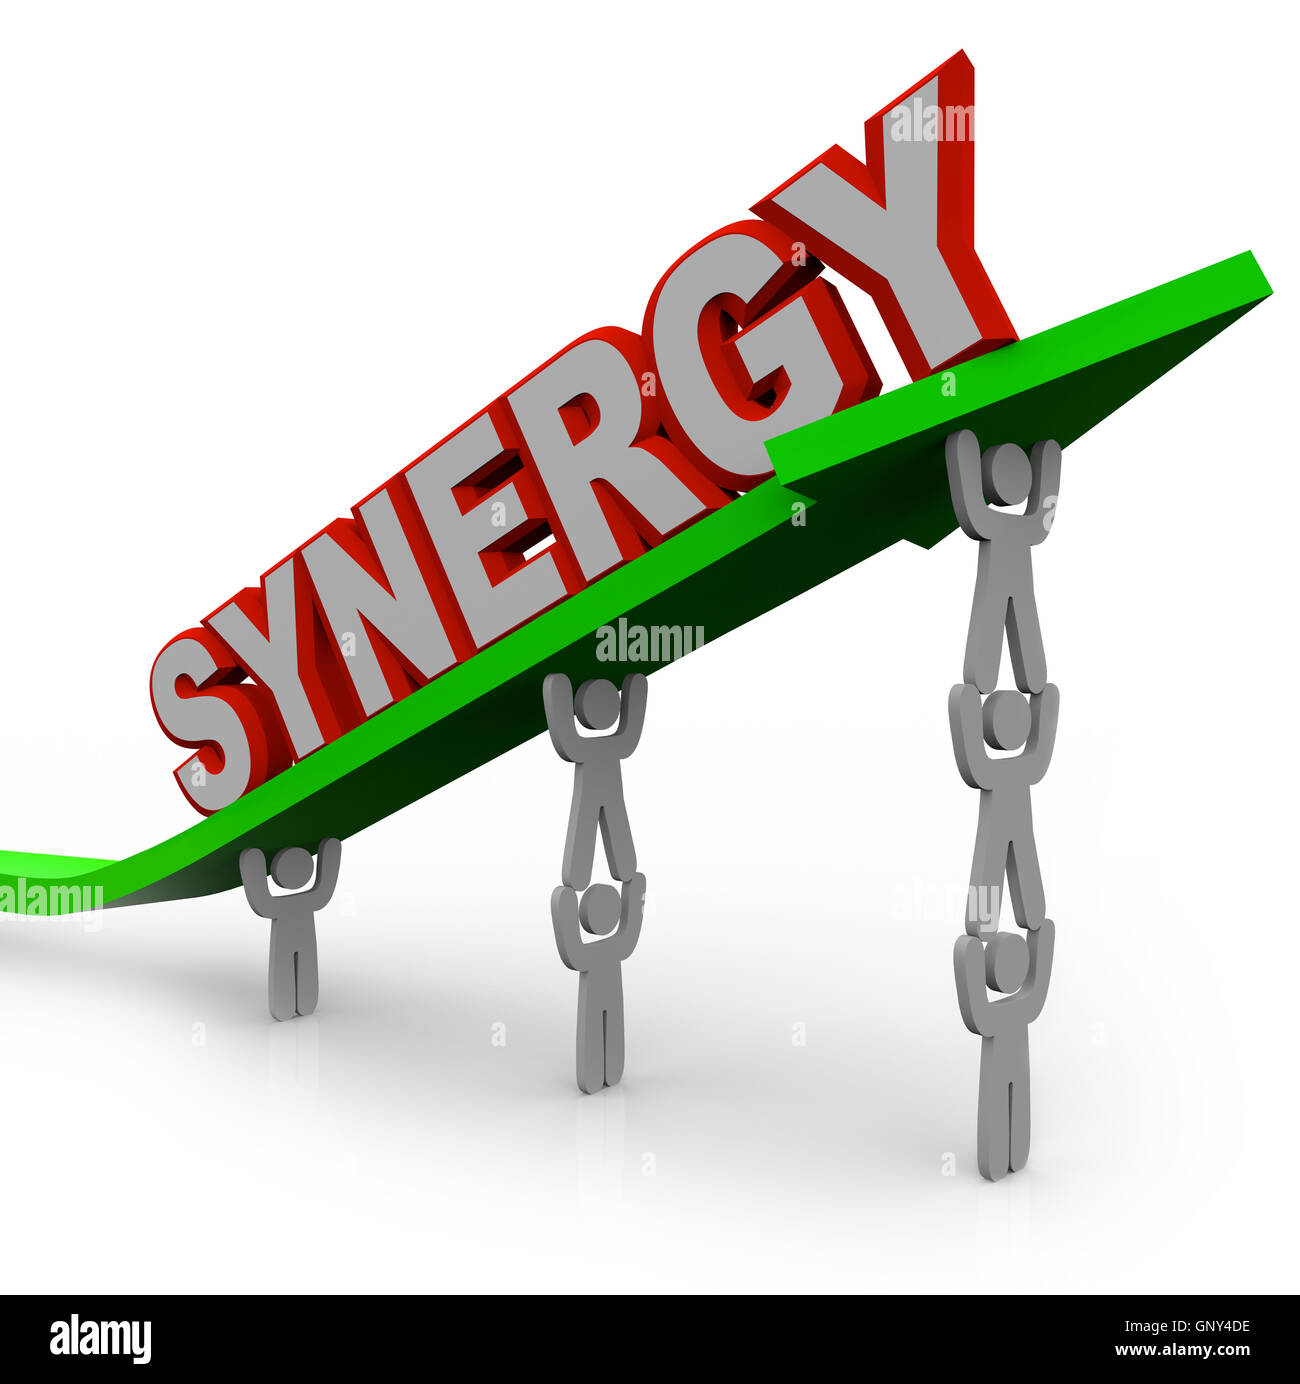 Synergy - Teamwork People Partner for Combined Strength Stock Photo